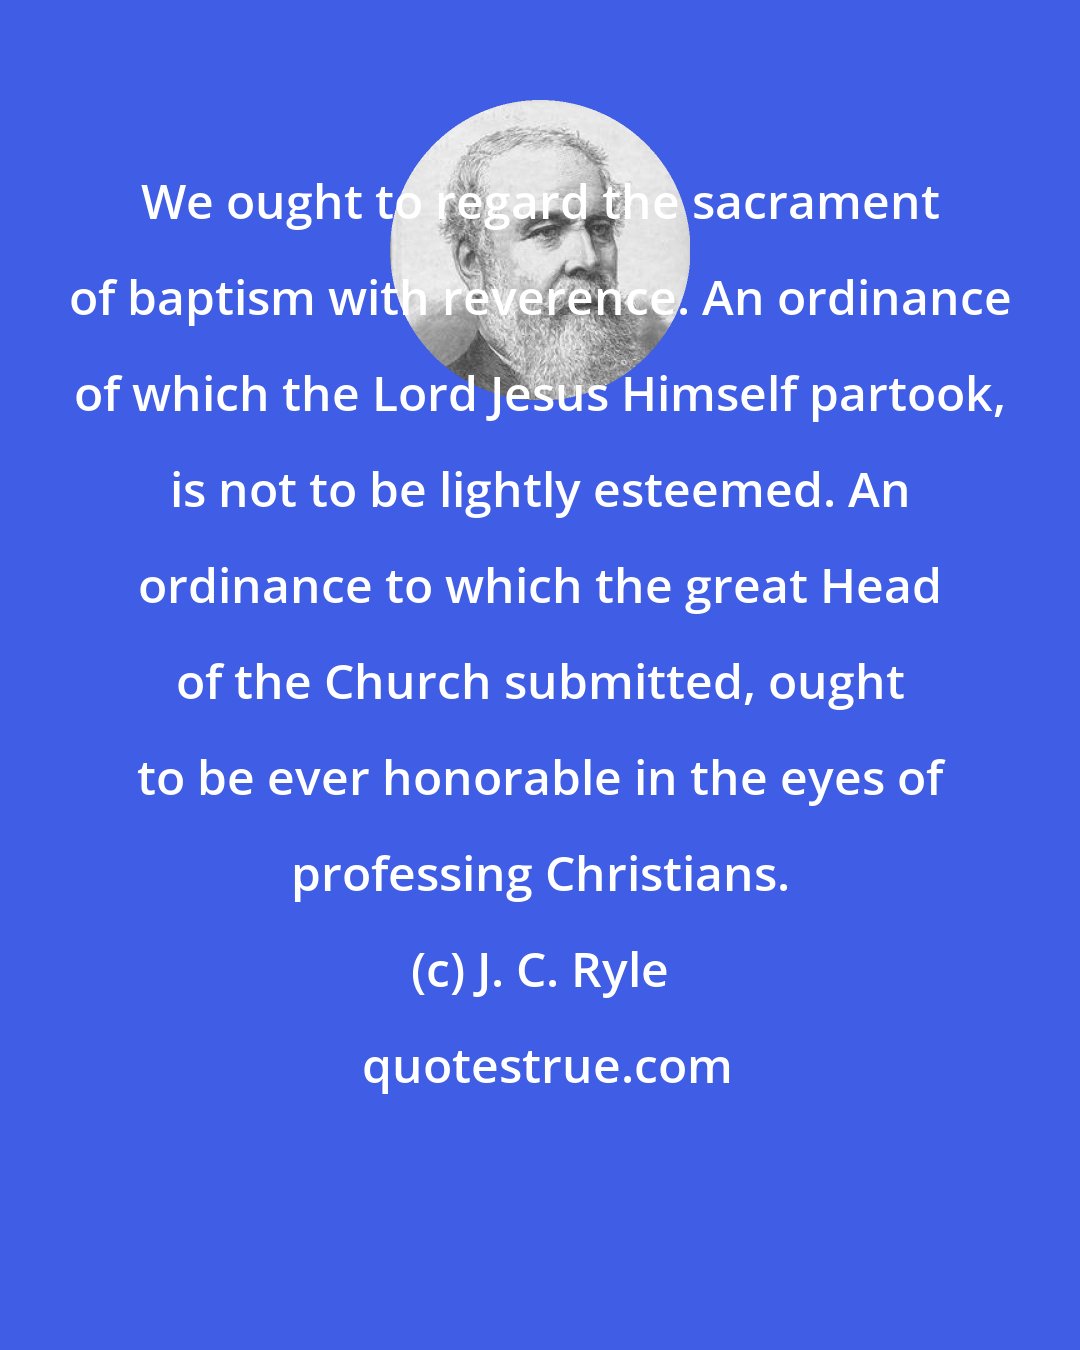 J. C. Ryle: We ought to regard the sacrament of baptism with reverence. An ordinance of which the Lord Jesus Himself partook, is not to be lightly esteemed. An ordinance to which the great Head of the Church submitted, ought to be ever honorable in the eyes of professing Christians.